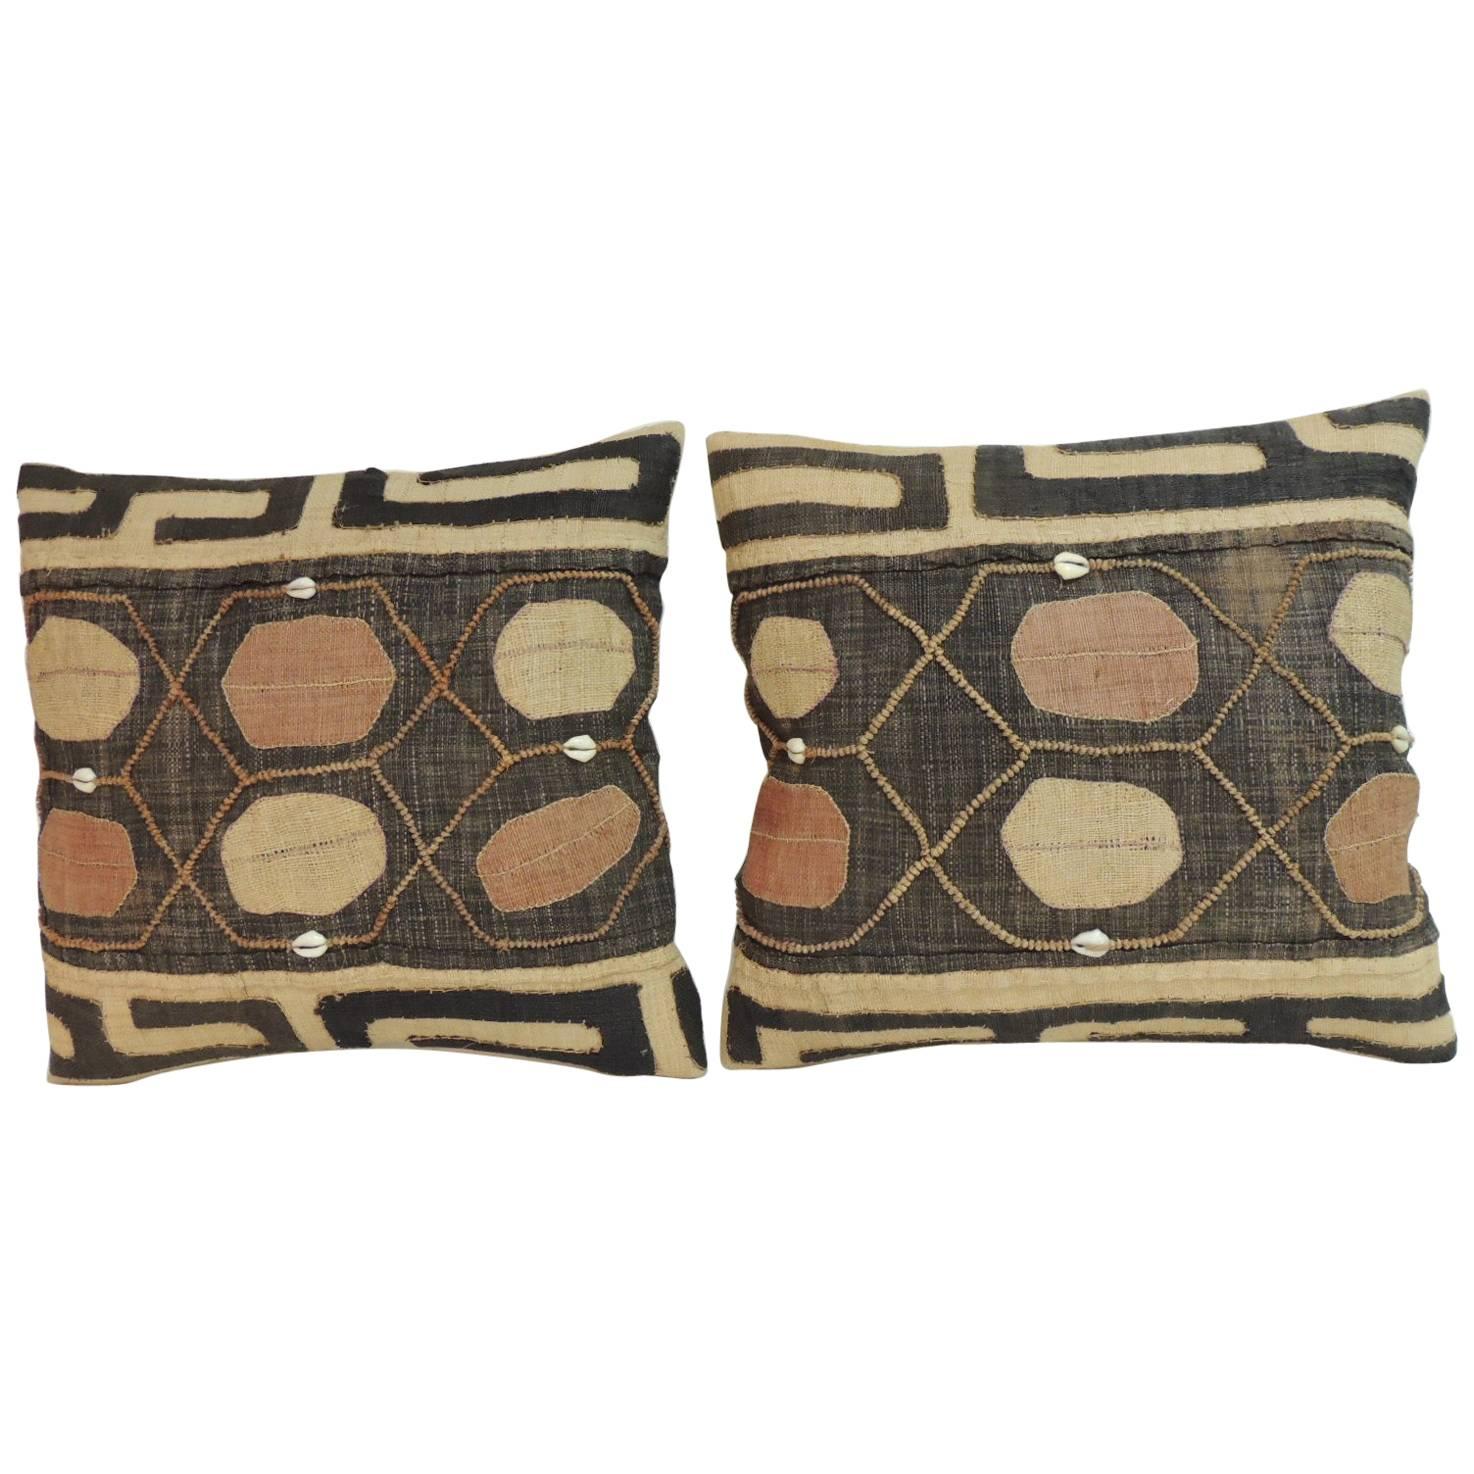 Pair of Vintage Embroidery African Tribal Lumbar Pillows with Cowries Shells